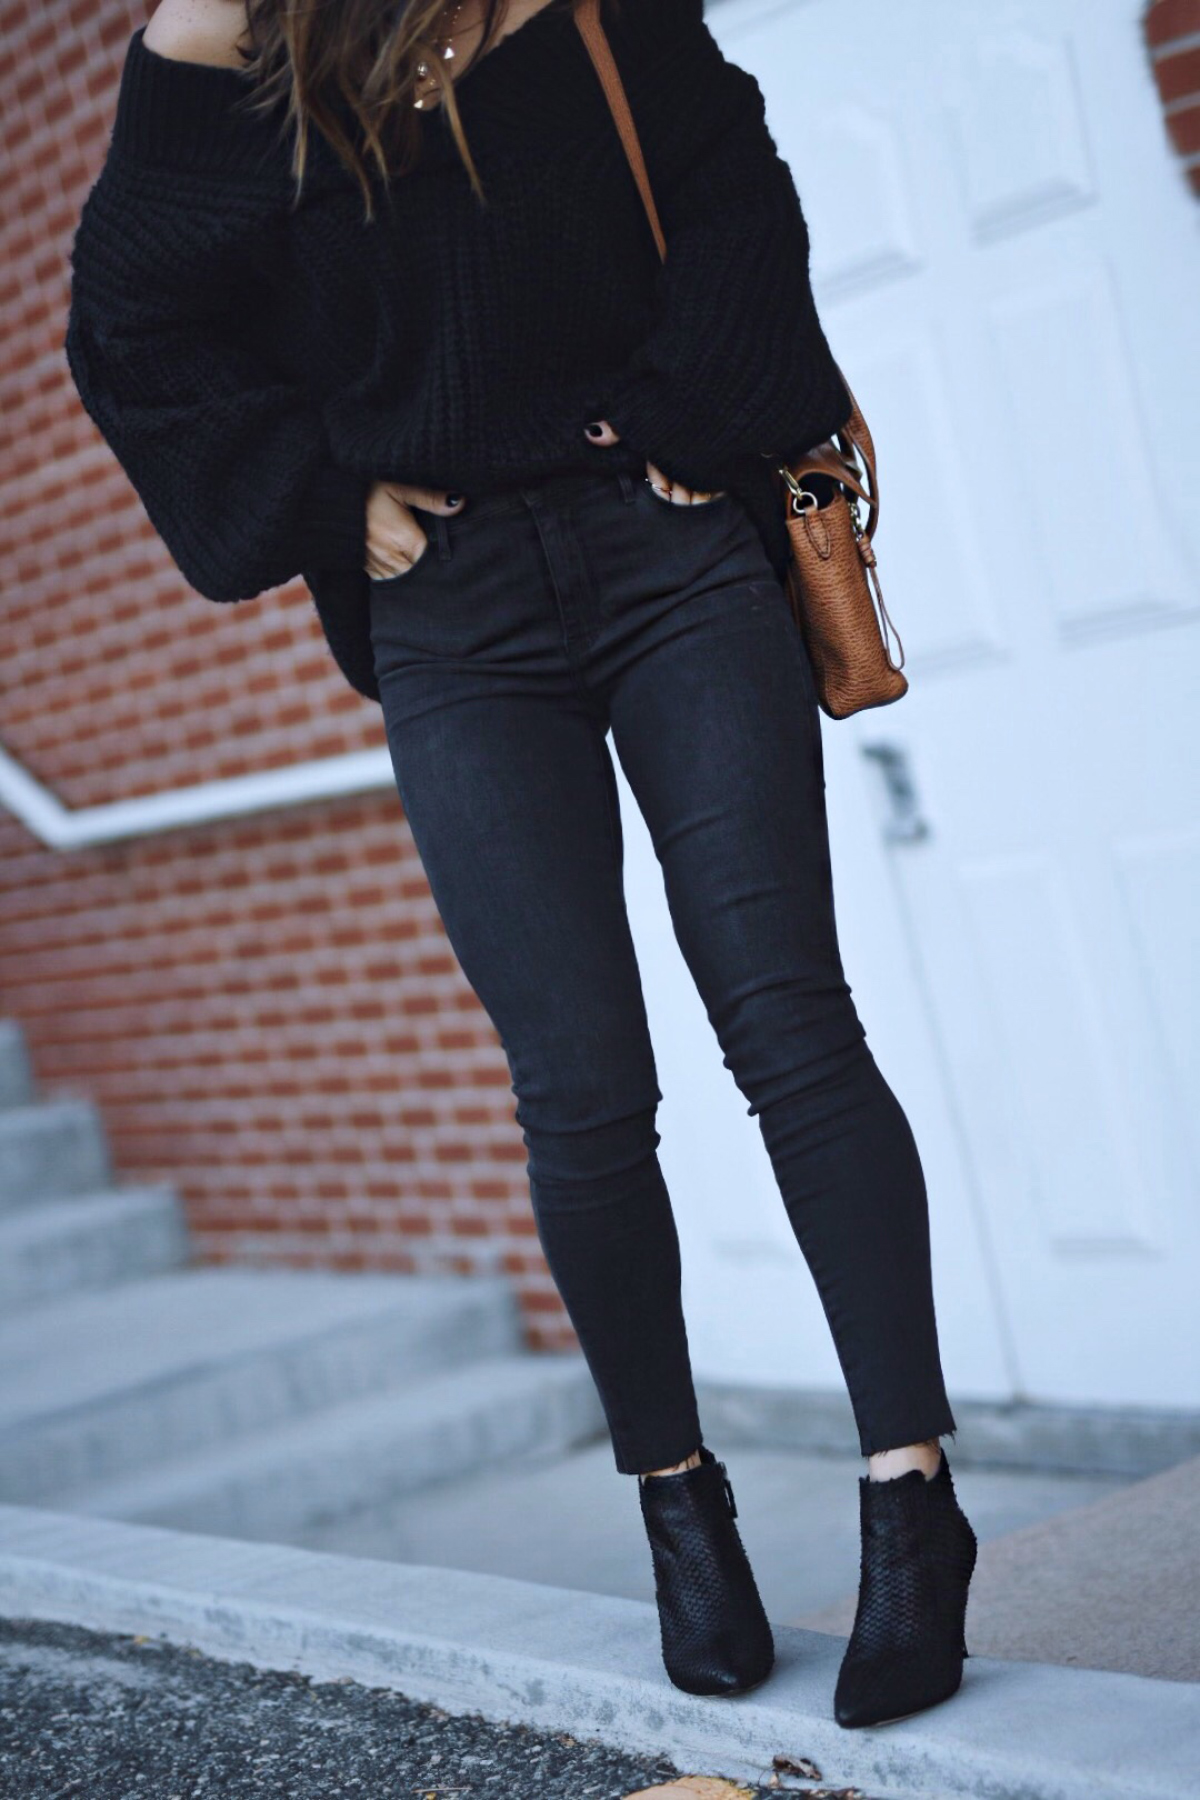 Carolina Hellal of Chic Talk wearing a shein knit sweater, topshop jeans, 3.1 phillip lim bag, johnston & Murphy boots and marc jacobs watch - NORDSTROM FALL SALE TOP PICKS by popular Denver fashion blogger Chic Talk